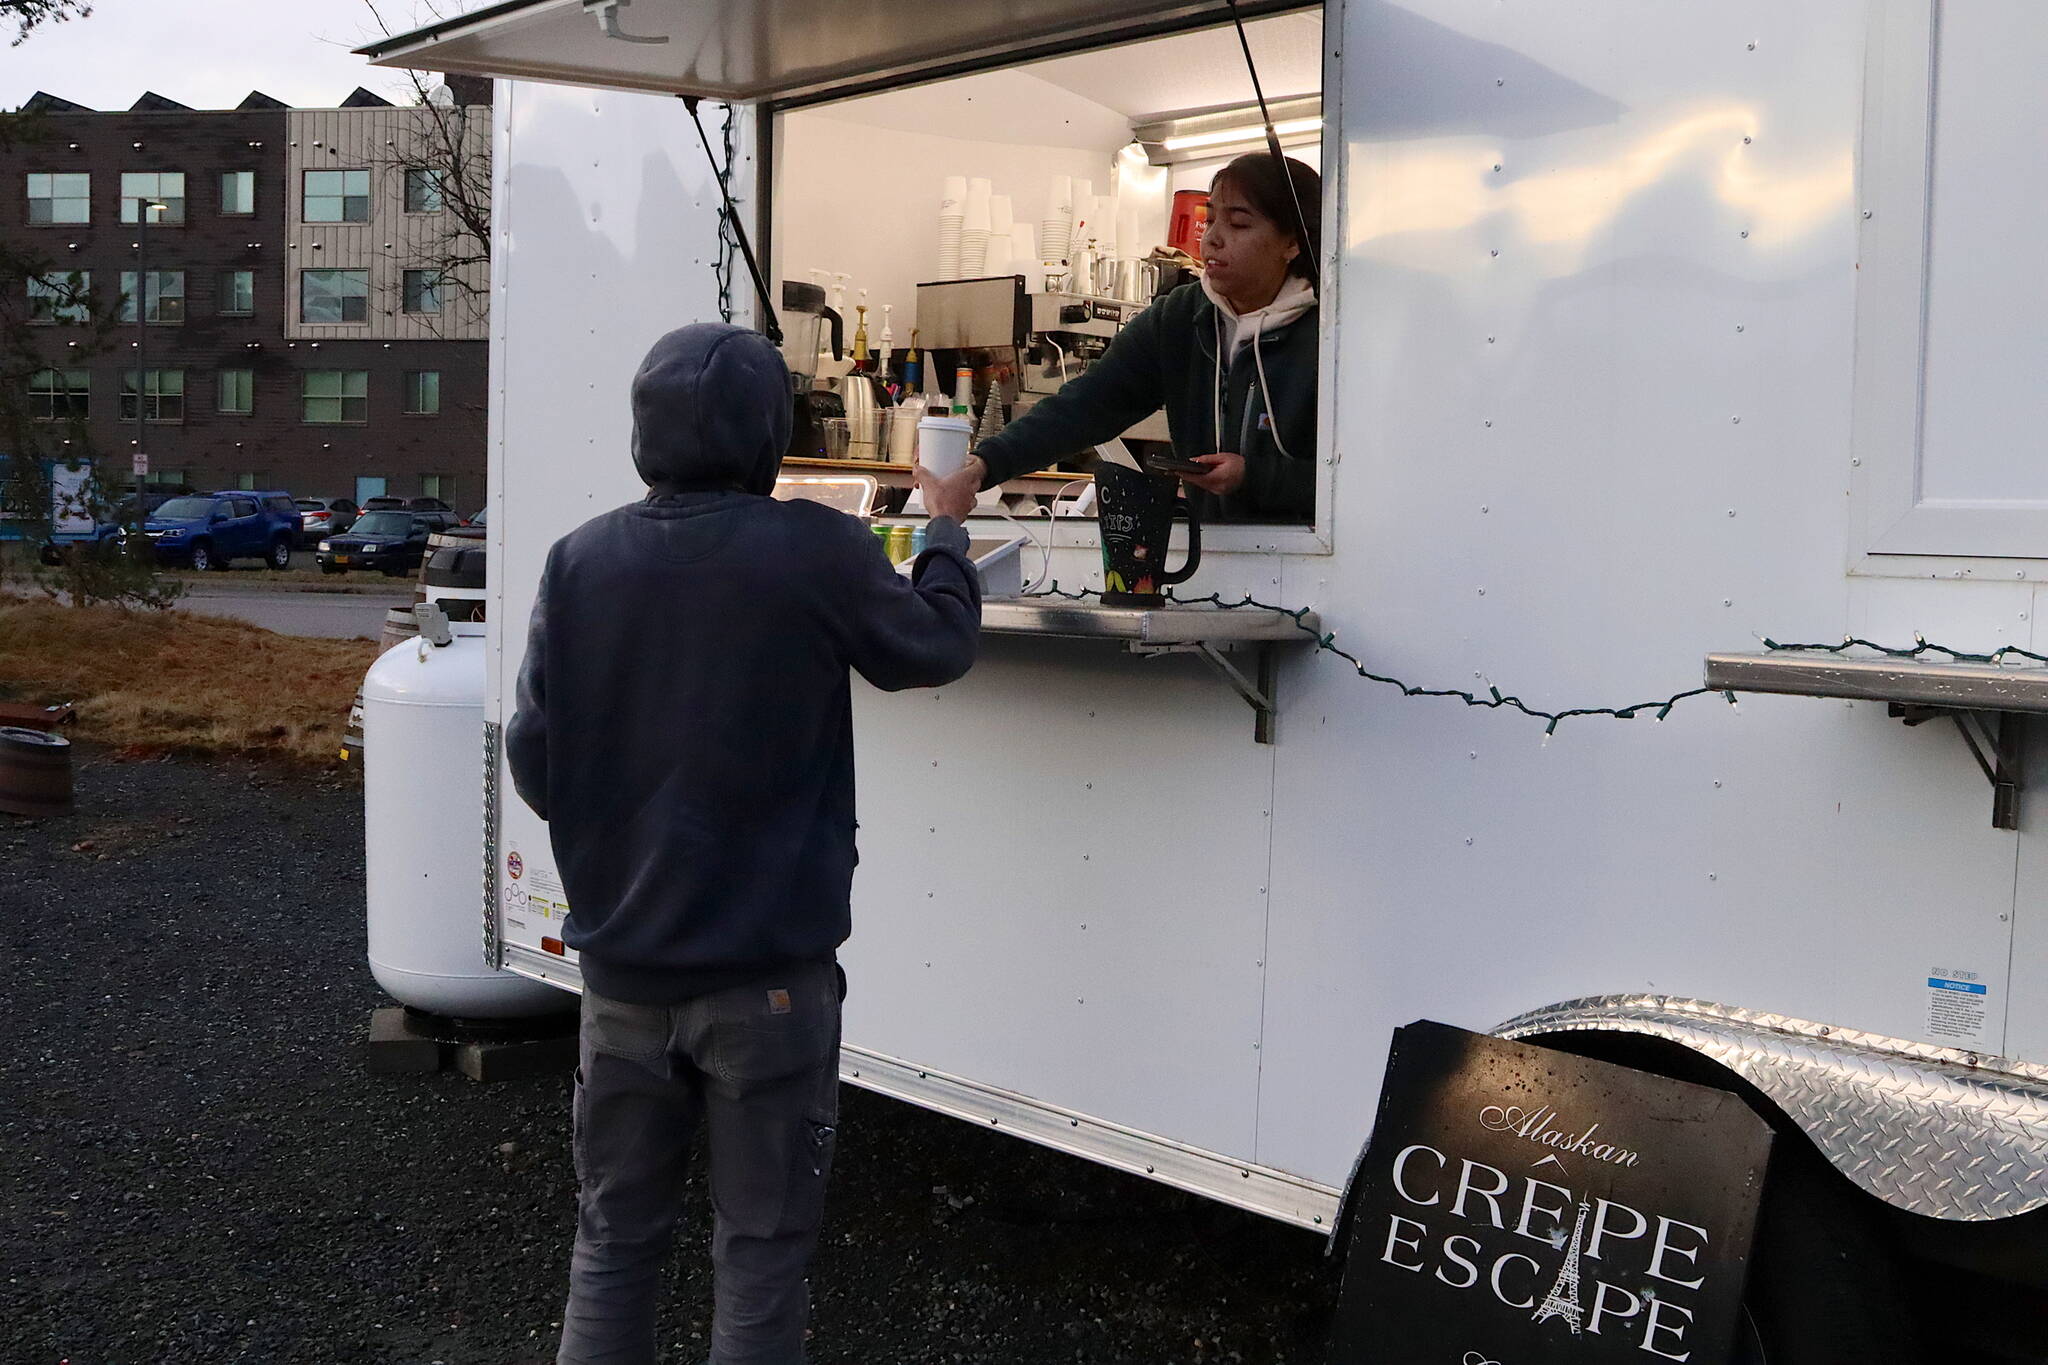 Larissa Dybdahl, an employee at the Crepe Escape food truck, hands a drunk to Brandon Elton at the new Vintage Food Truck Park on Wednesday. (Mark Sabbatini / Juneau Empire)